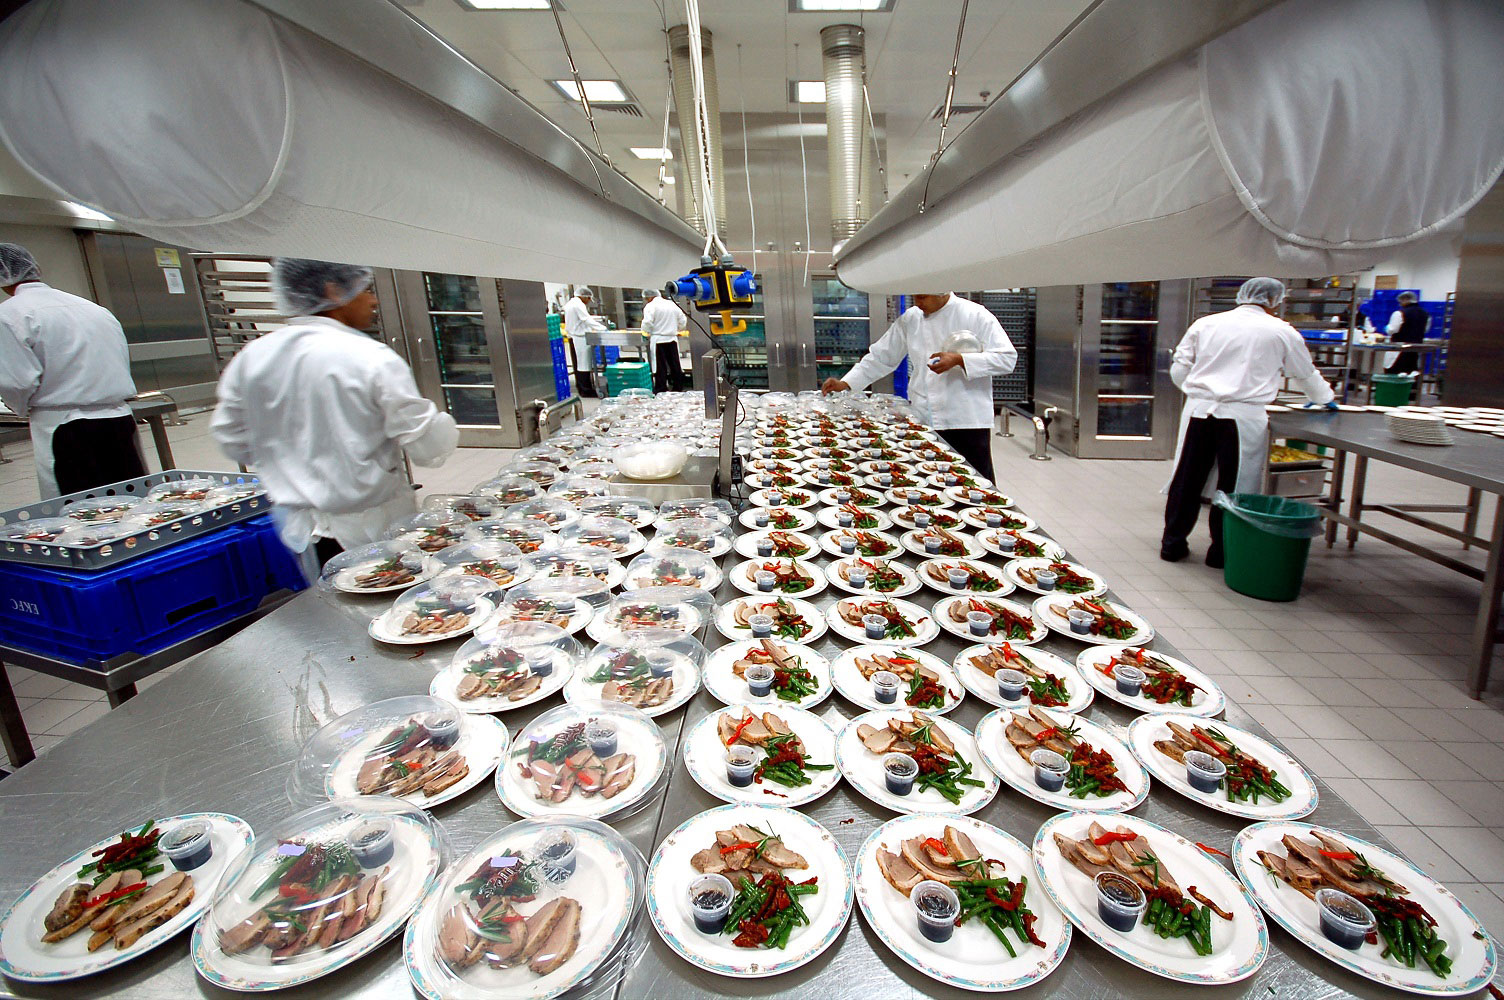 Meal preparation for aircraft in a commercial kitchen